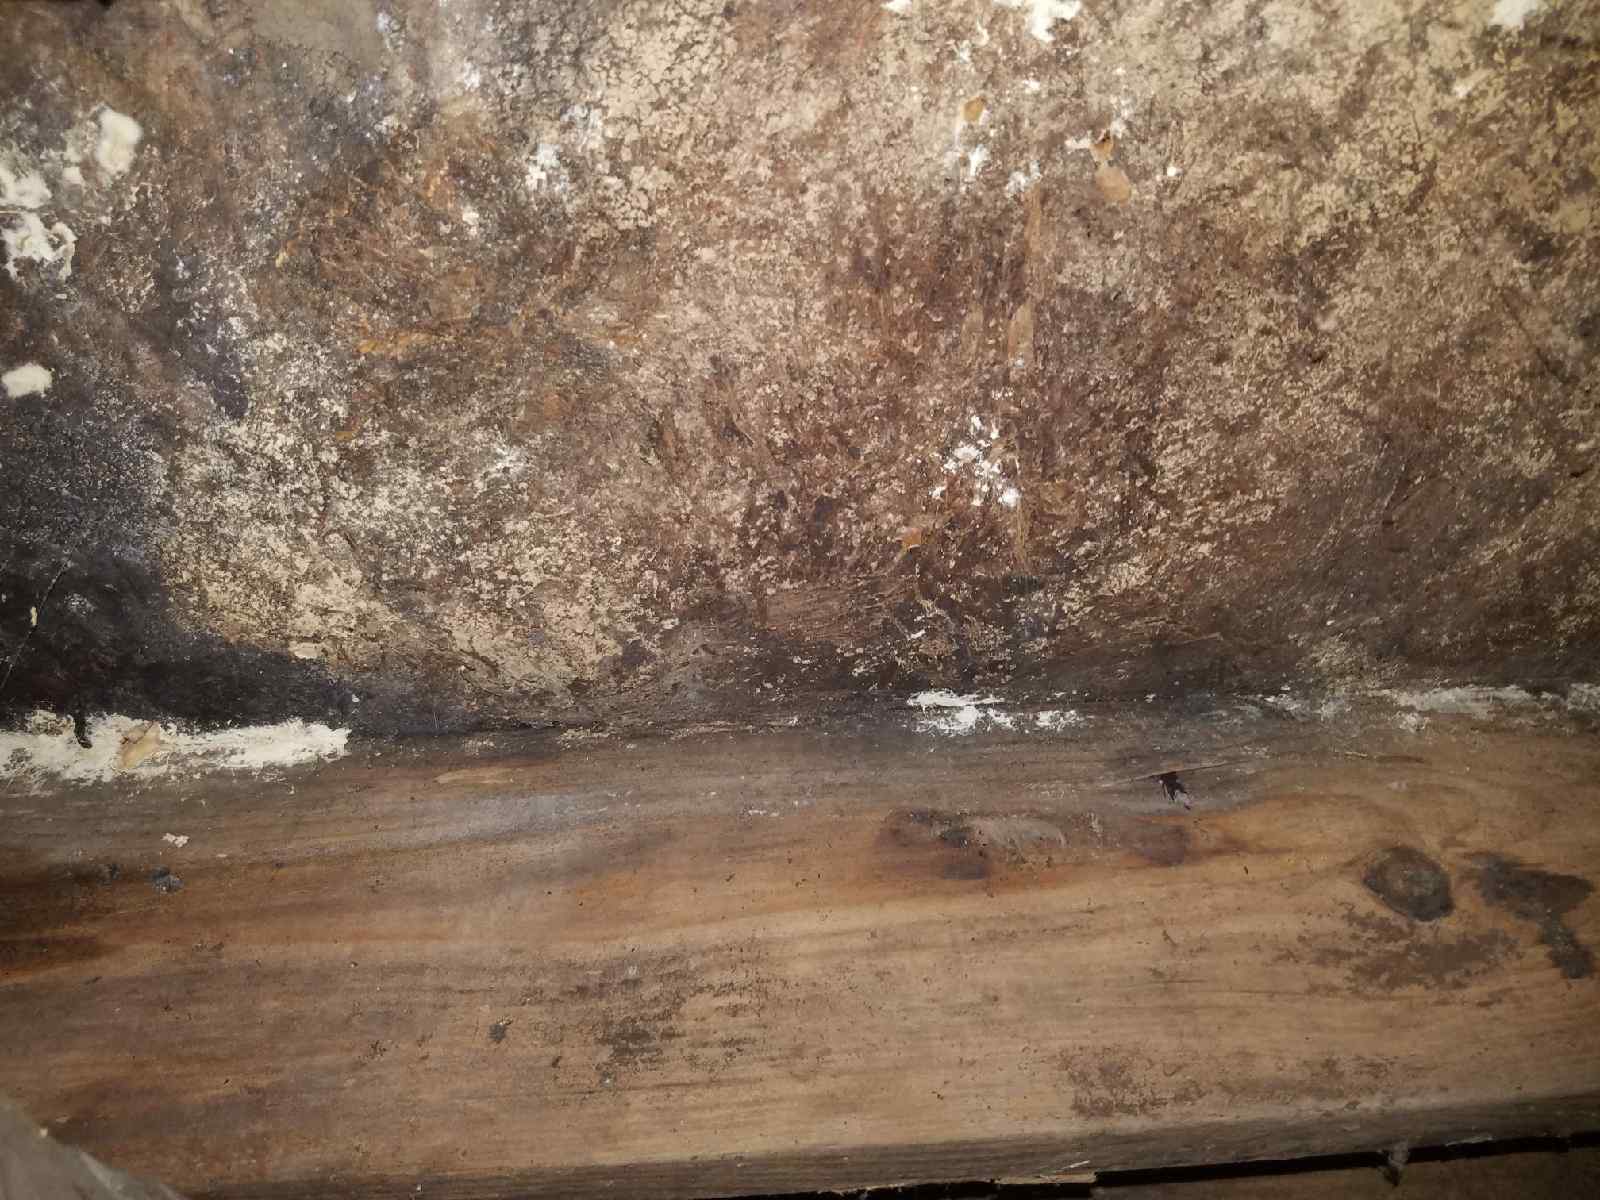 Particle board swollen from hot water spray